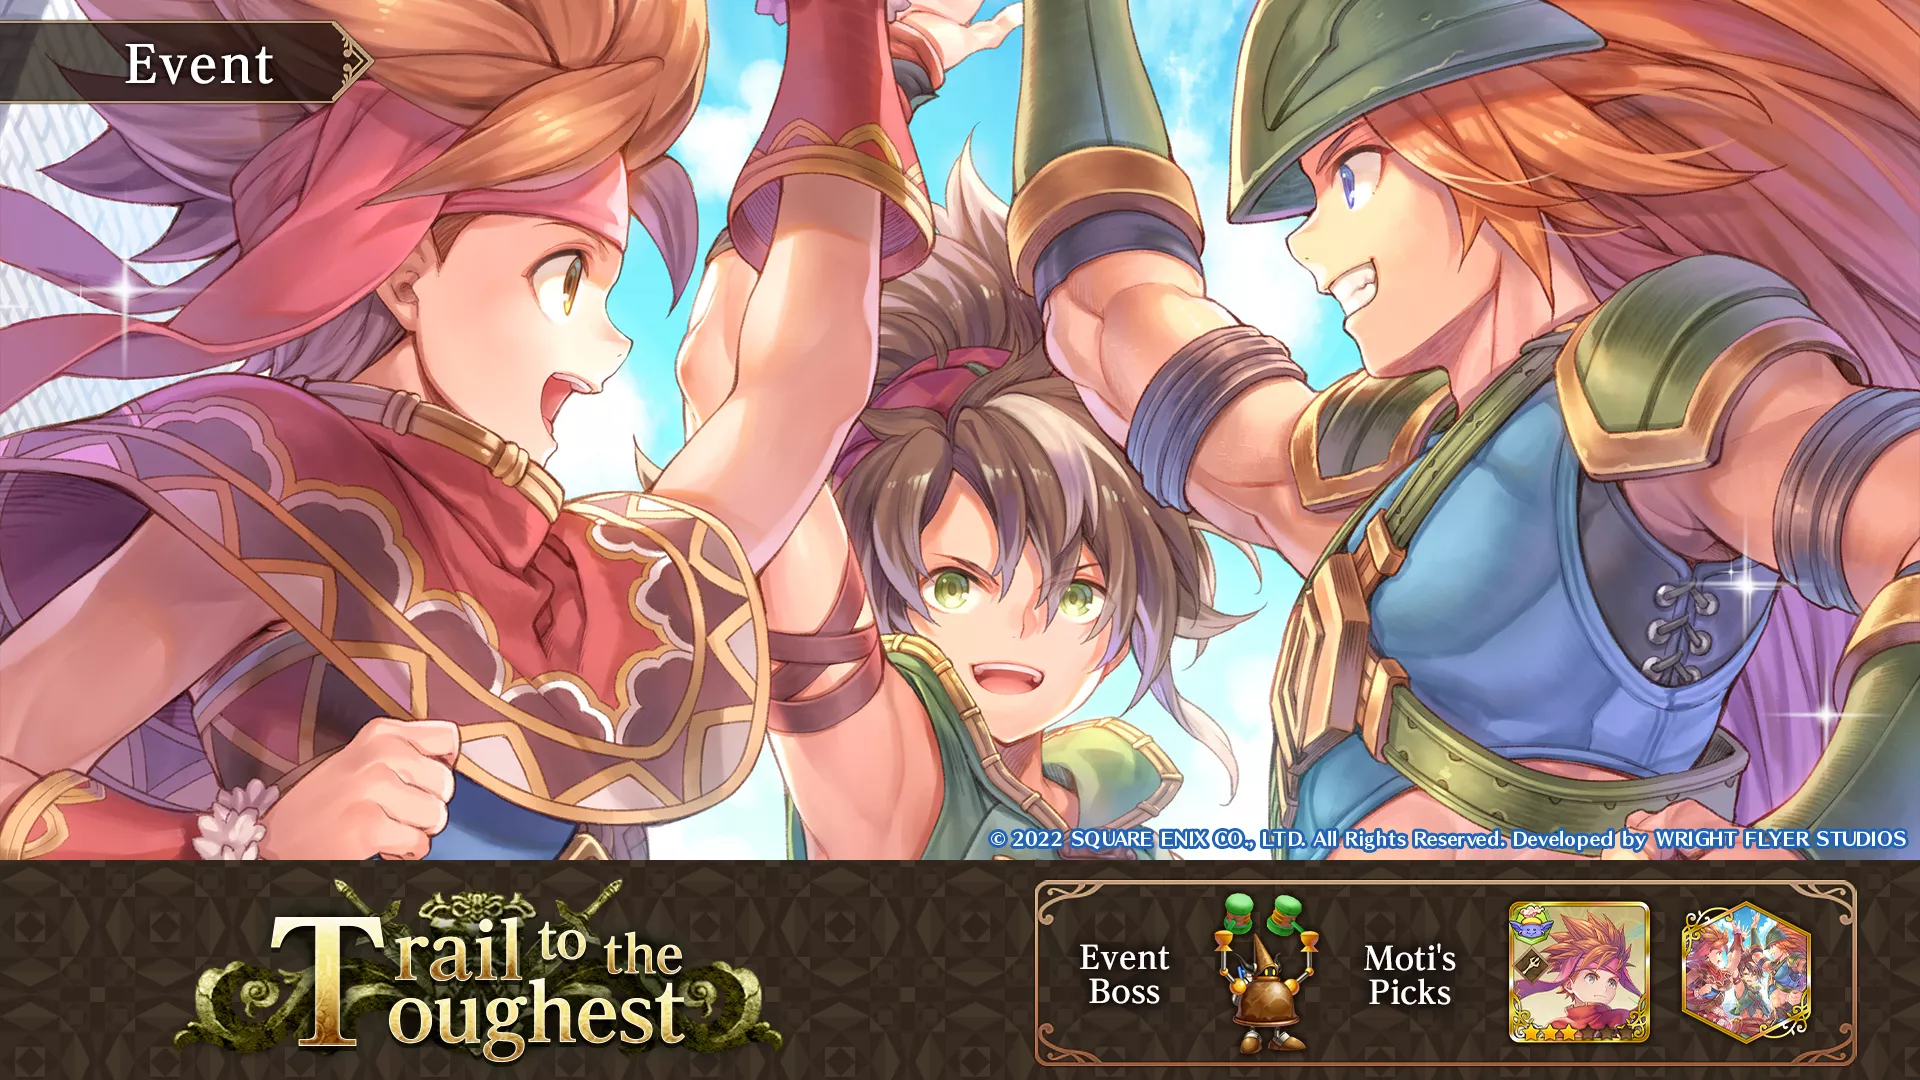 Echoes of Mana: Das F2P Action-RPG ist ab sofort spielbar Heropic